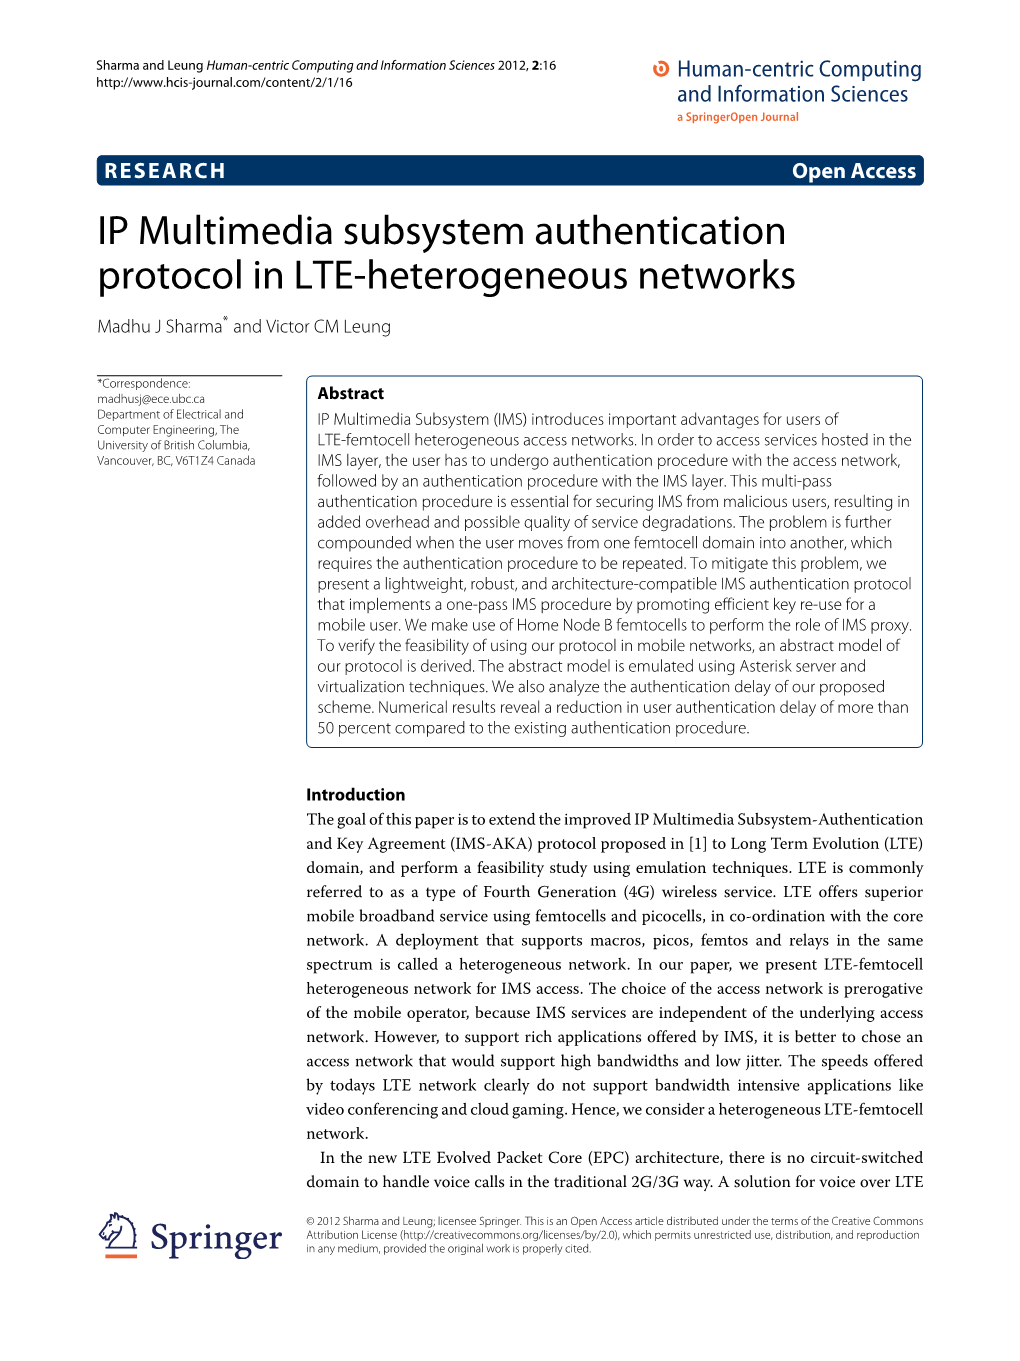 IP Multimedia Subsystem Authentication Protocol in LTE-Heterogeneous Networks